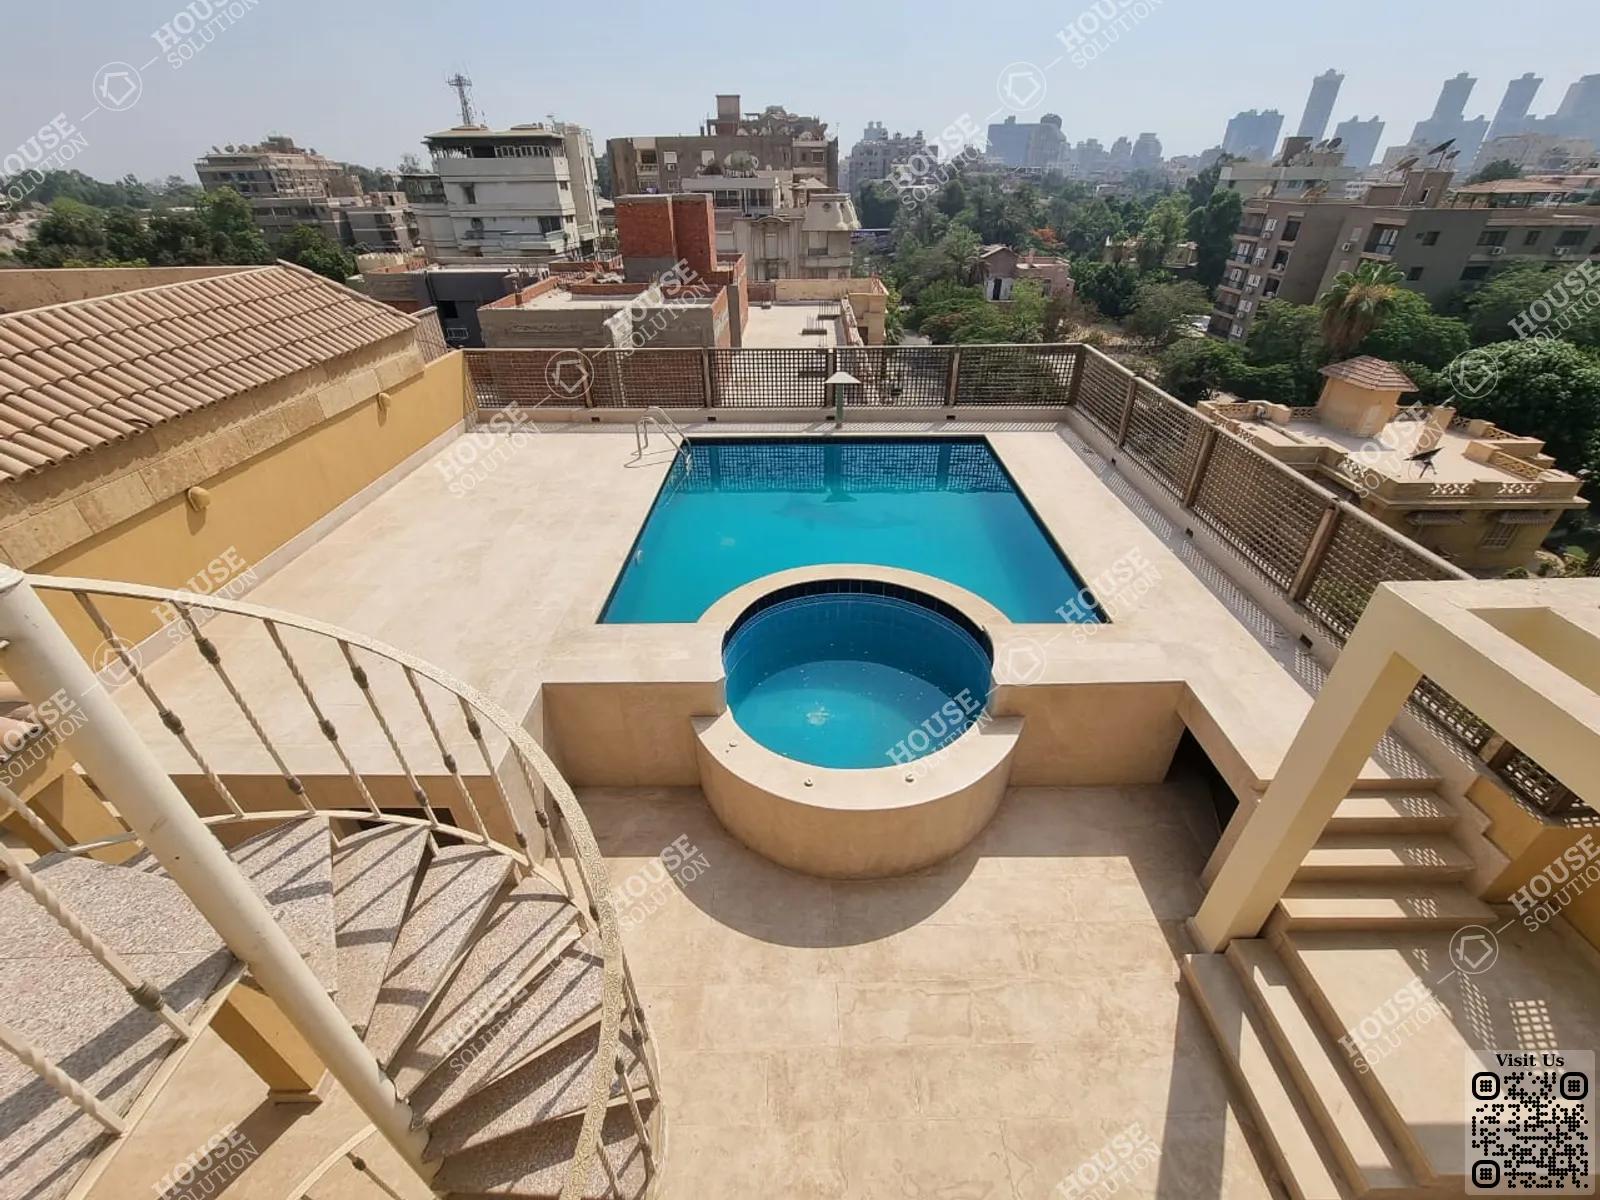 PRIVATE SWIMMING POOL  @ Penthouses For Rent In Maadi Maadi Sarayat Area: 500 m² consists of 4 Bedrooms 4 Bathrooms Modern furnished 5 stars #4683-0